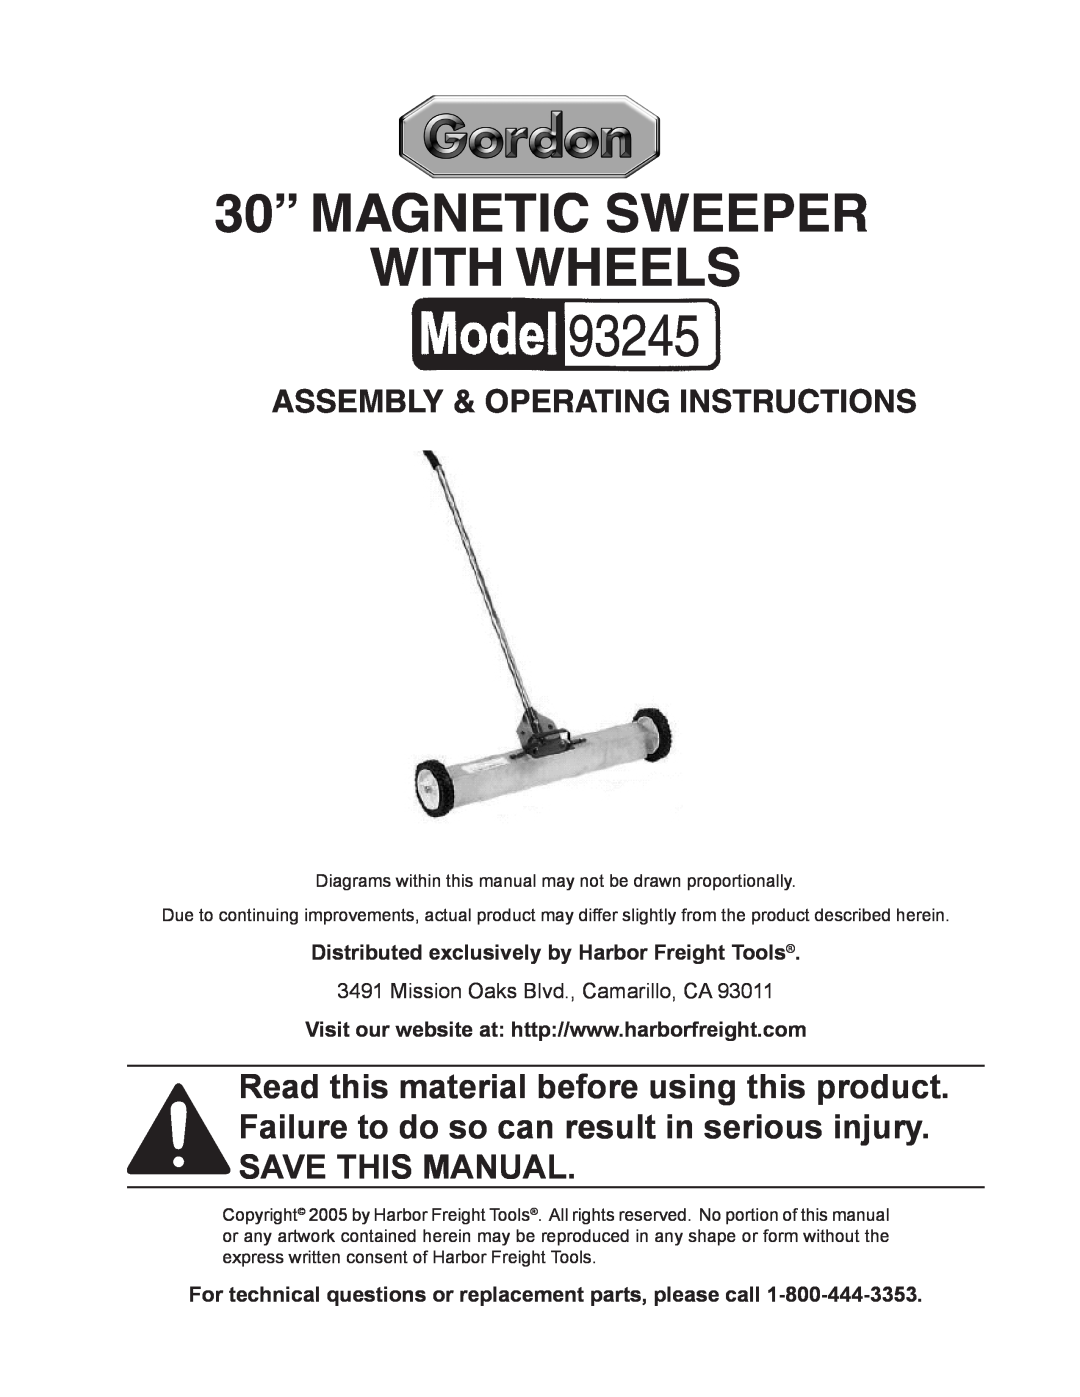 Harbor Freight Tools 93245 manual Mission Oaks Blvd., Camarillo, CA, 30” MAGNETIC SWEEPER WITH WHEELS 